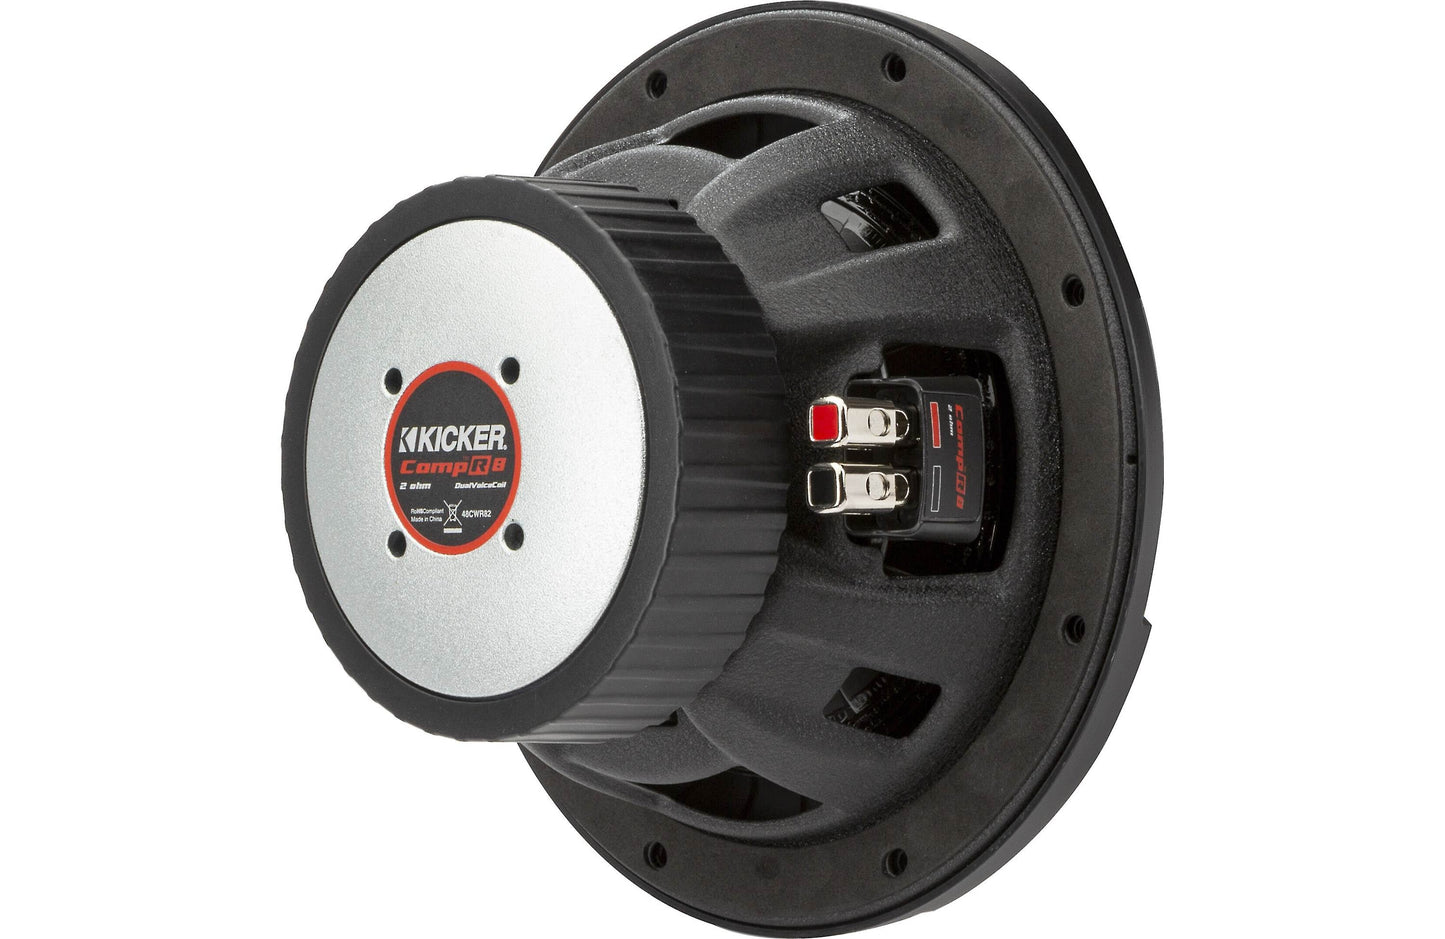 Kicker 48CWR84 CompR Series 8" subwoofer with dual 4-ohm voice coils